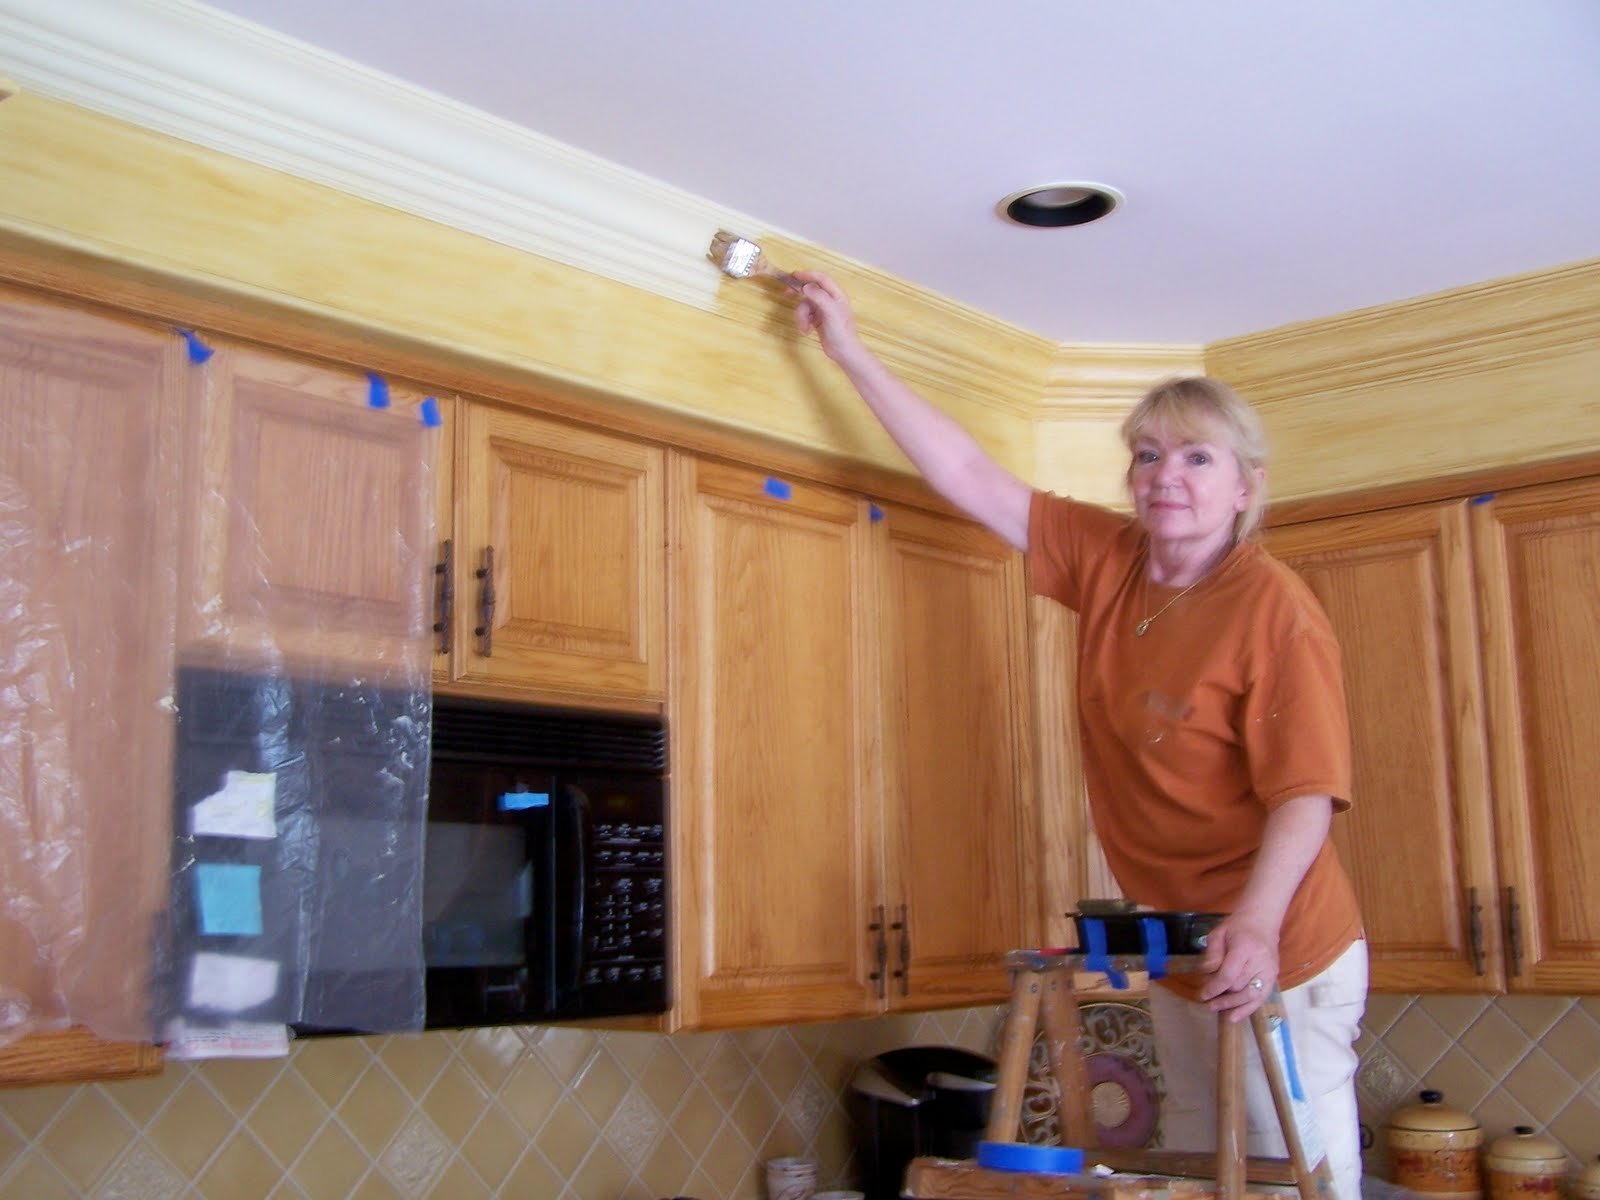  Kitchen  Cabinet  Makeover From Drab to Fab The Colorful 